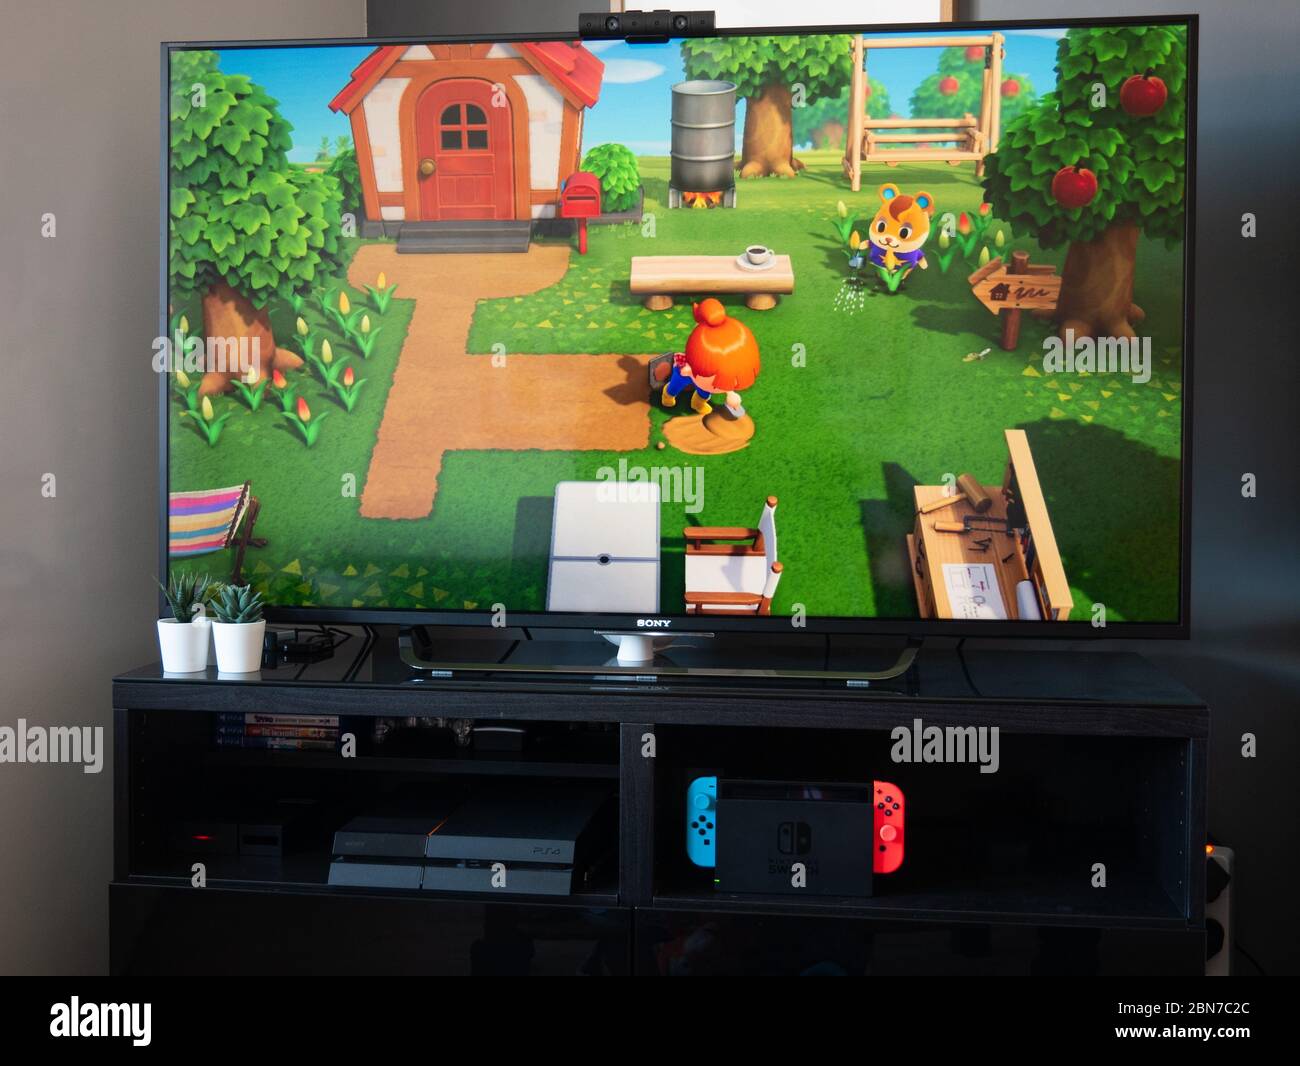 May 2020, UK: Nintendo switch games console on tv animal crossing new horizons Stock Photo